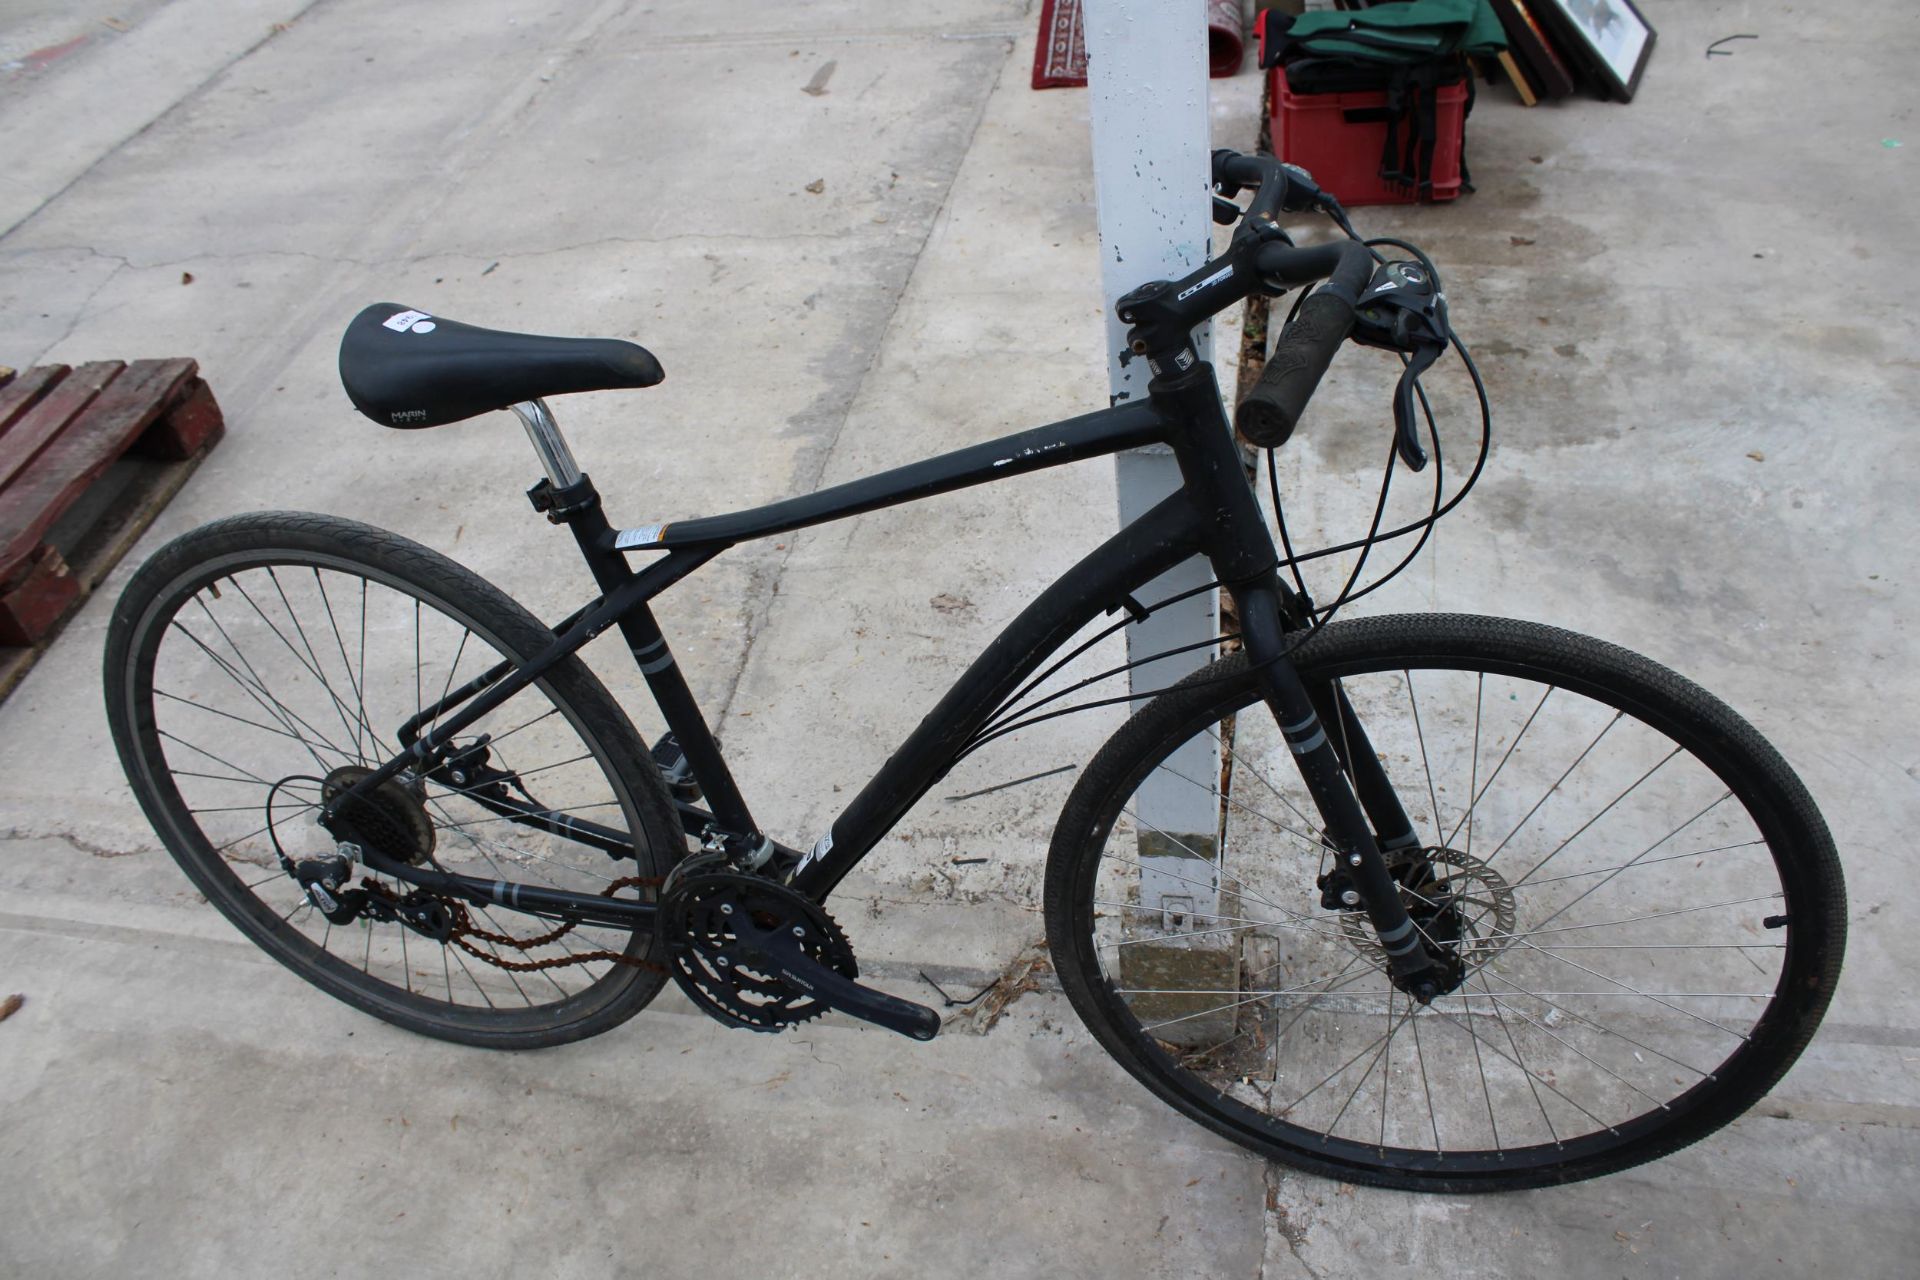 A GENTS GT BIKE WITH 21 SPEED SHIMANO GEAR SYSTEM